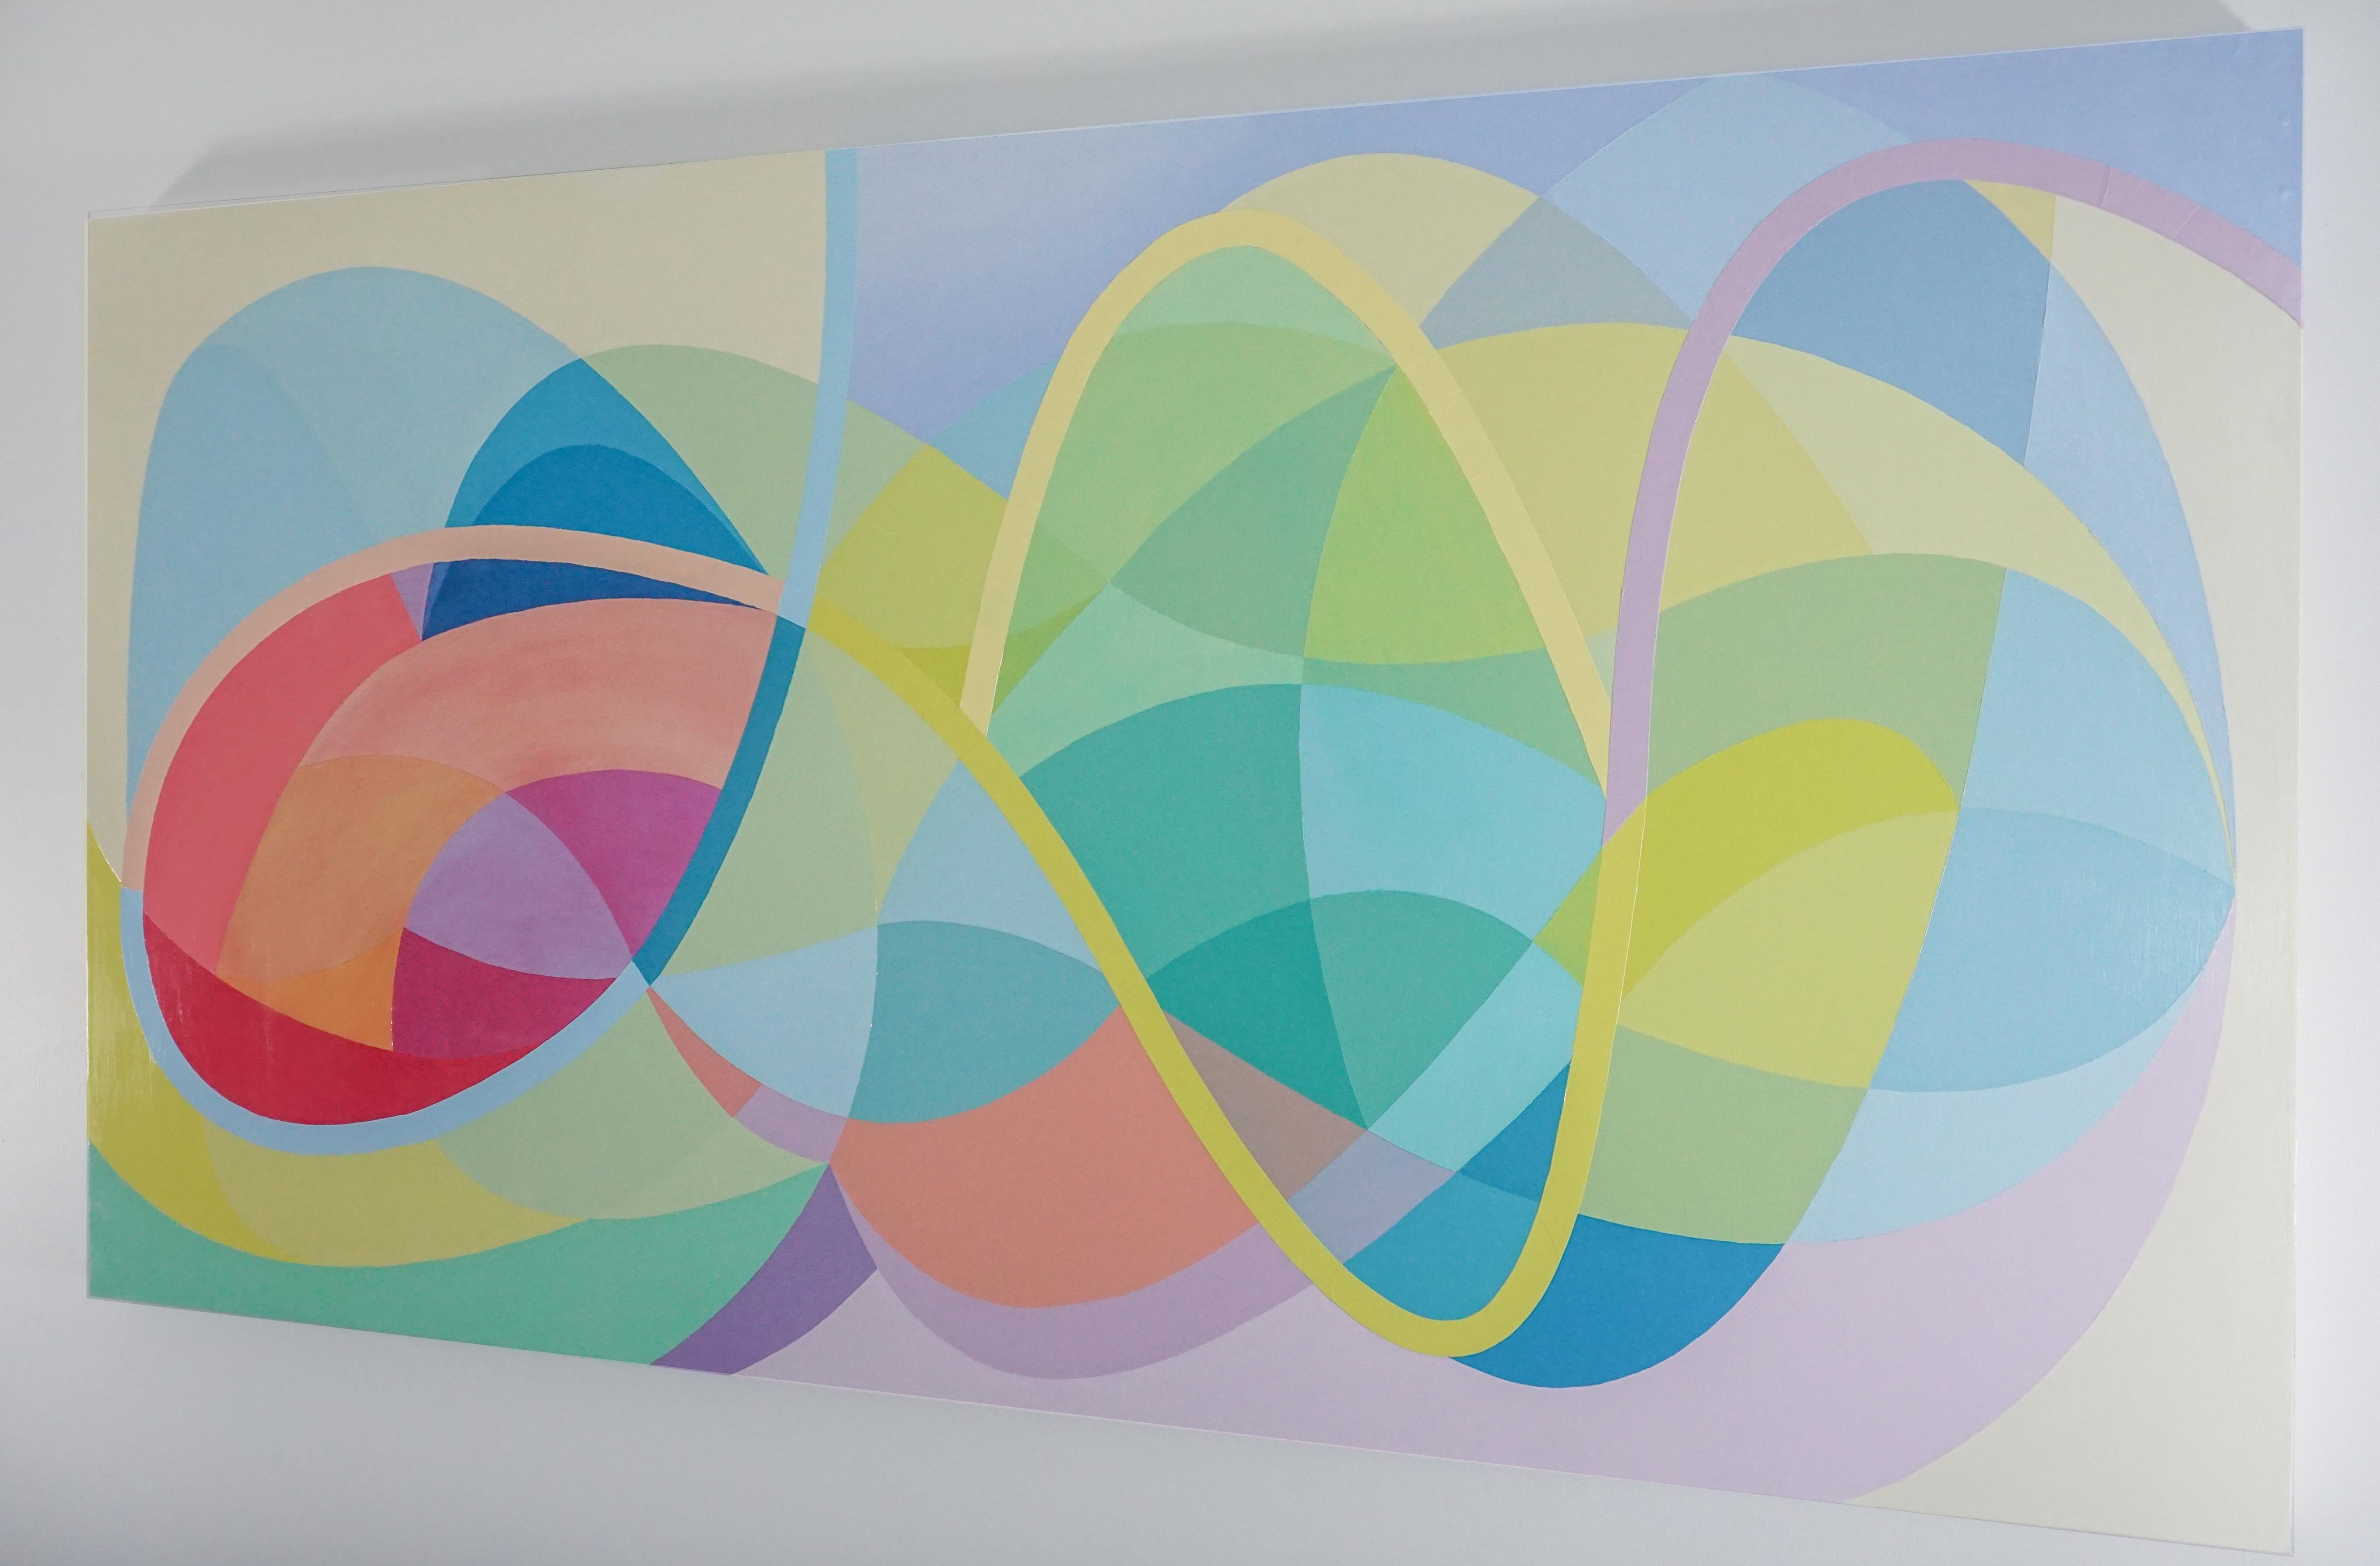 In this painting, Michelle Weddle utilizes line, color, and form to create a work which acts at the balance between the nonobjective and representational. Using looping, wavy lines surrounded by a rainbow of pastel colors, she is able to evoke a